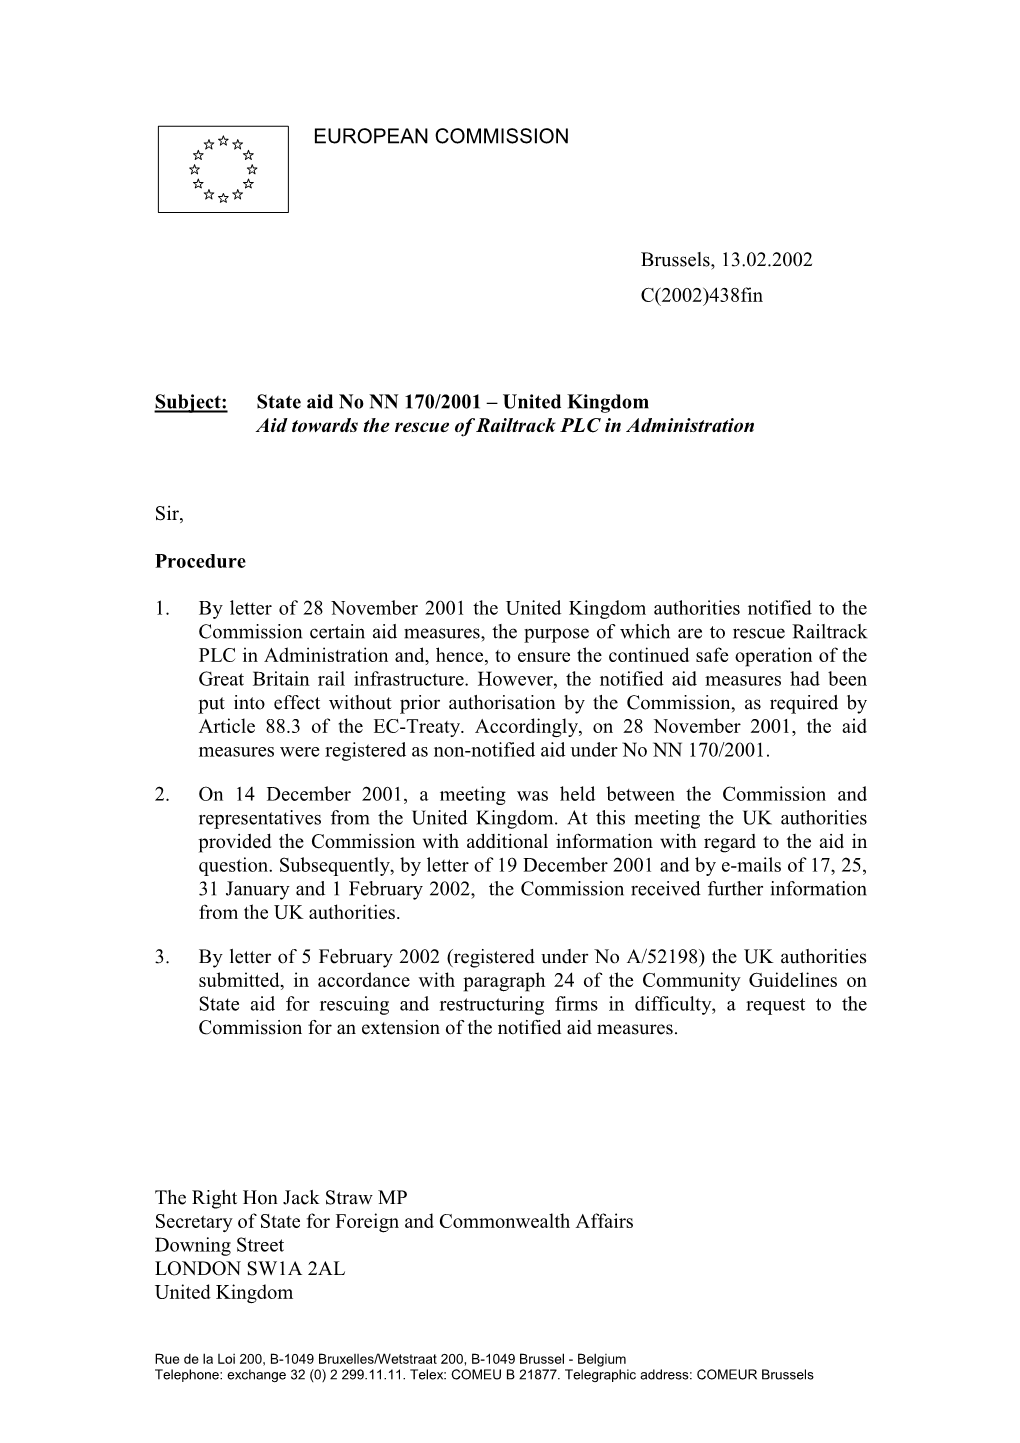 State Aid No NN 170/2001 – United Kingdom Aid Towards the Rescue of Railtrack PLC in Administration